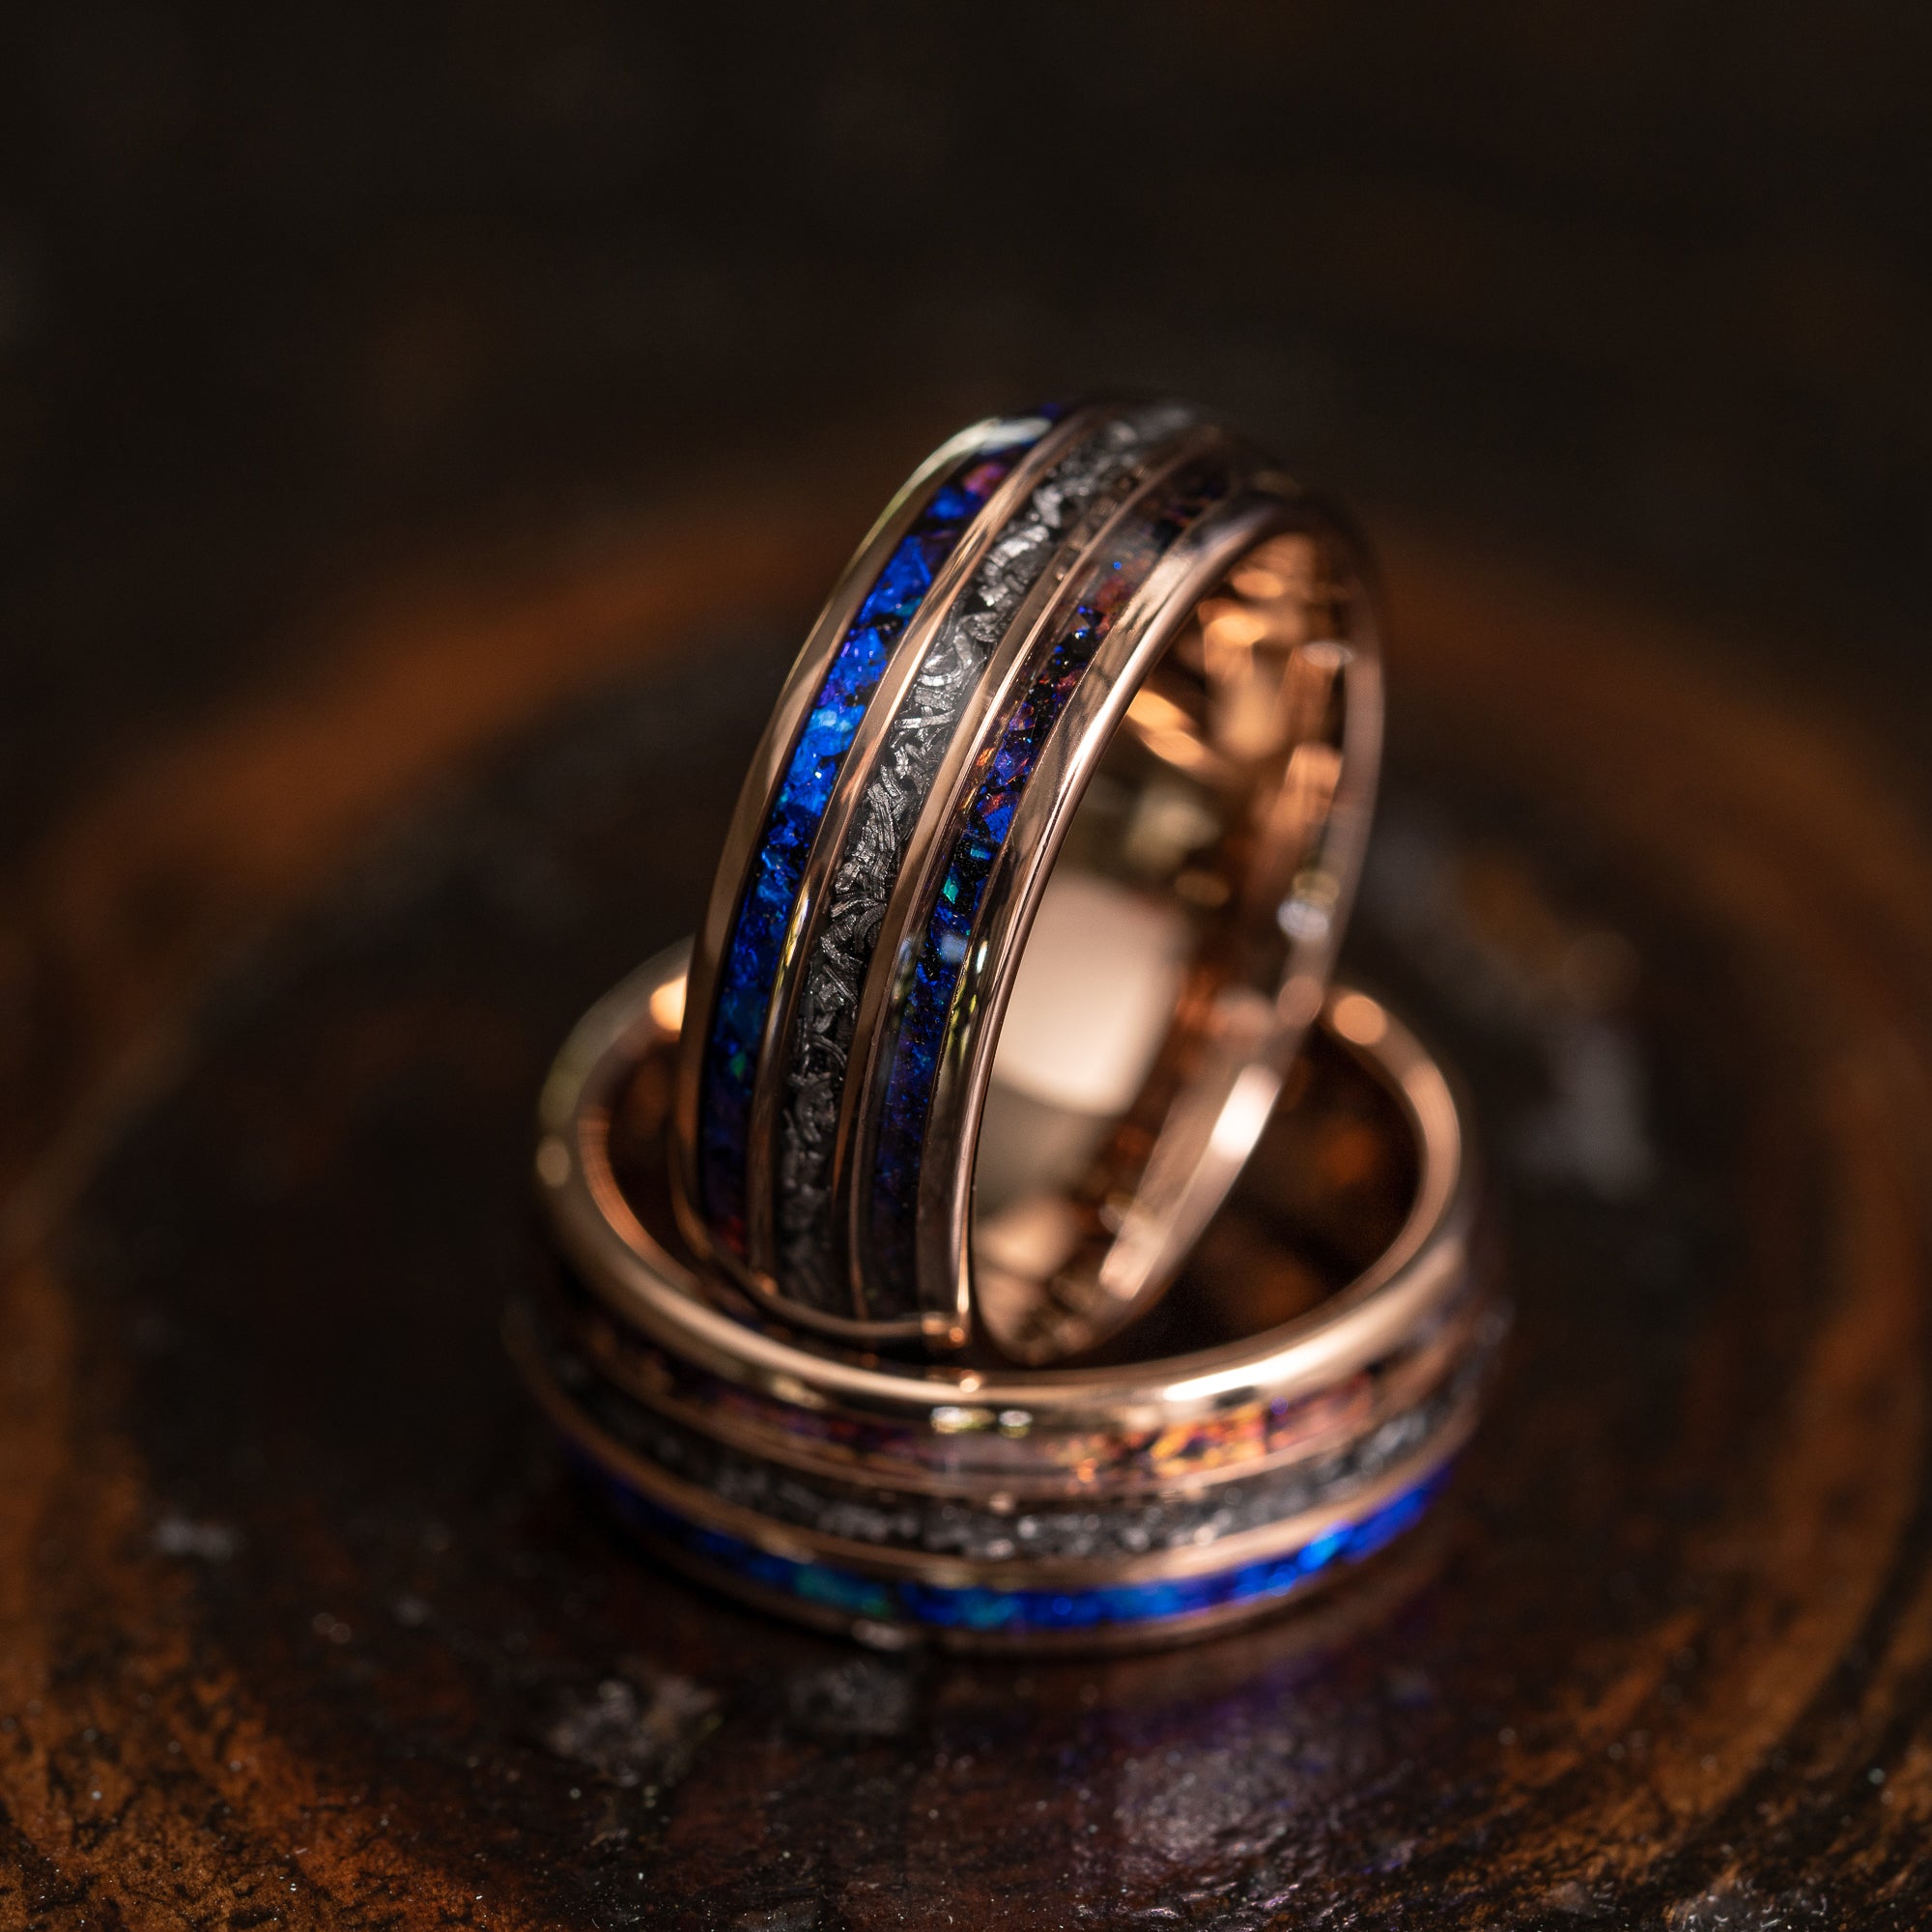 "Dionysus" Domed Nebula Ring- Meteorite and Opal- Rose Gold Tungsten 6mm/8mm